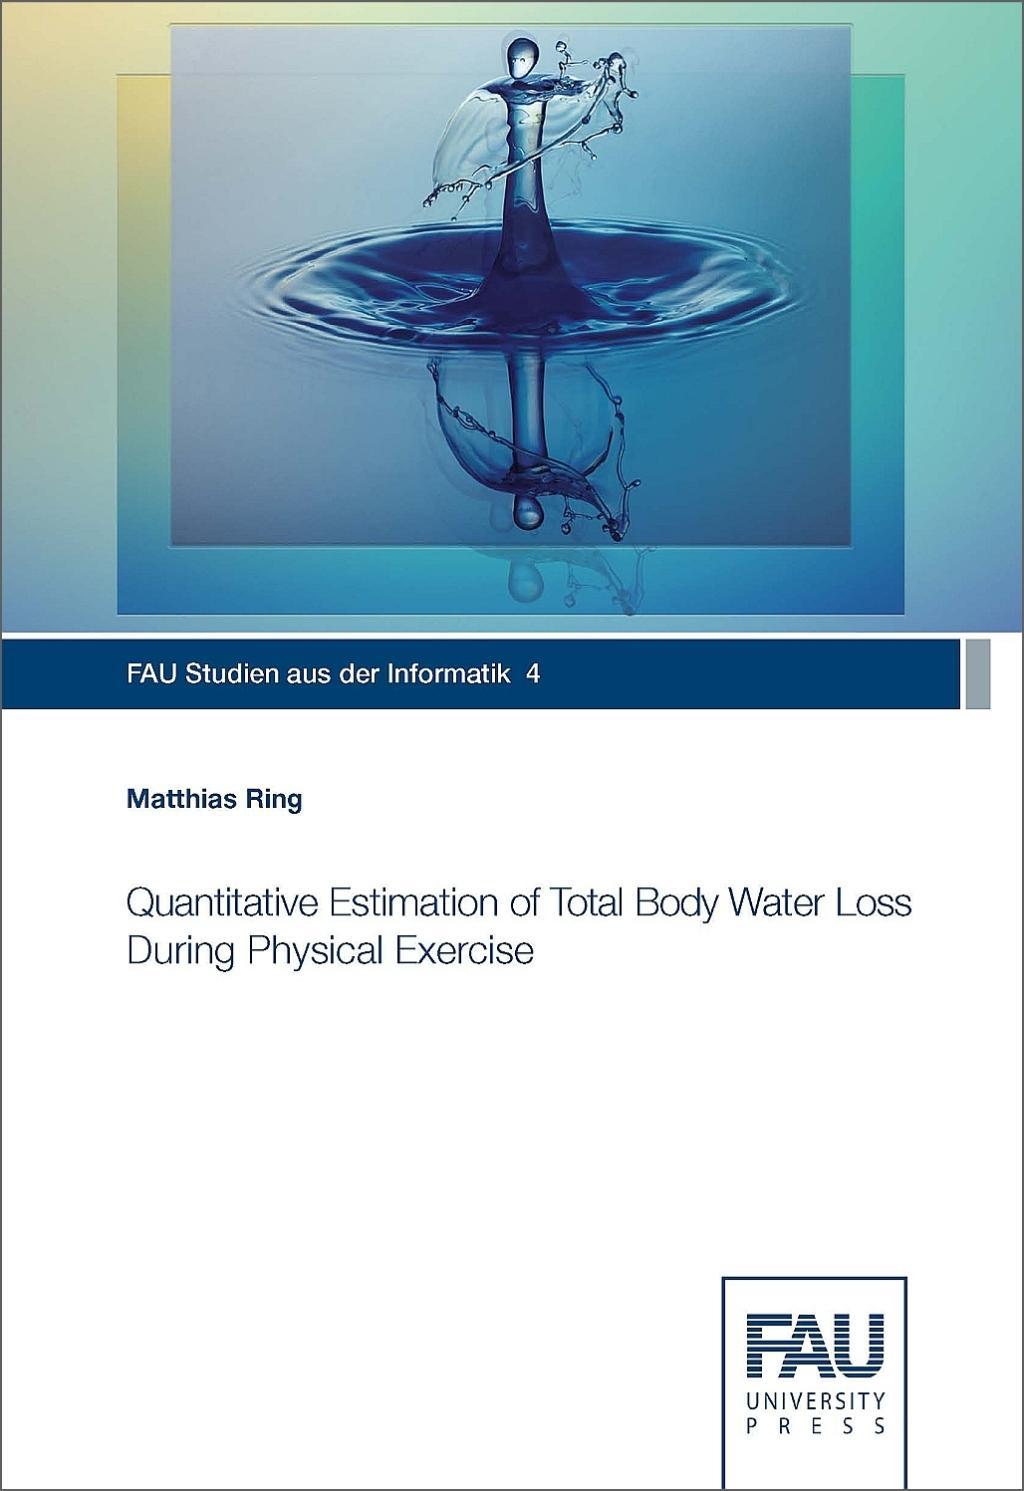 Quantitative Estimation of Total BodyWater Loss During Physical Exercise - Ring, Matthias